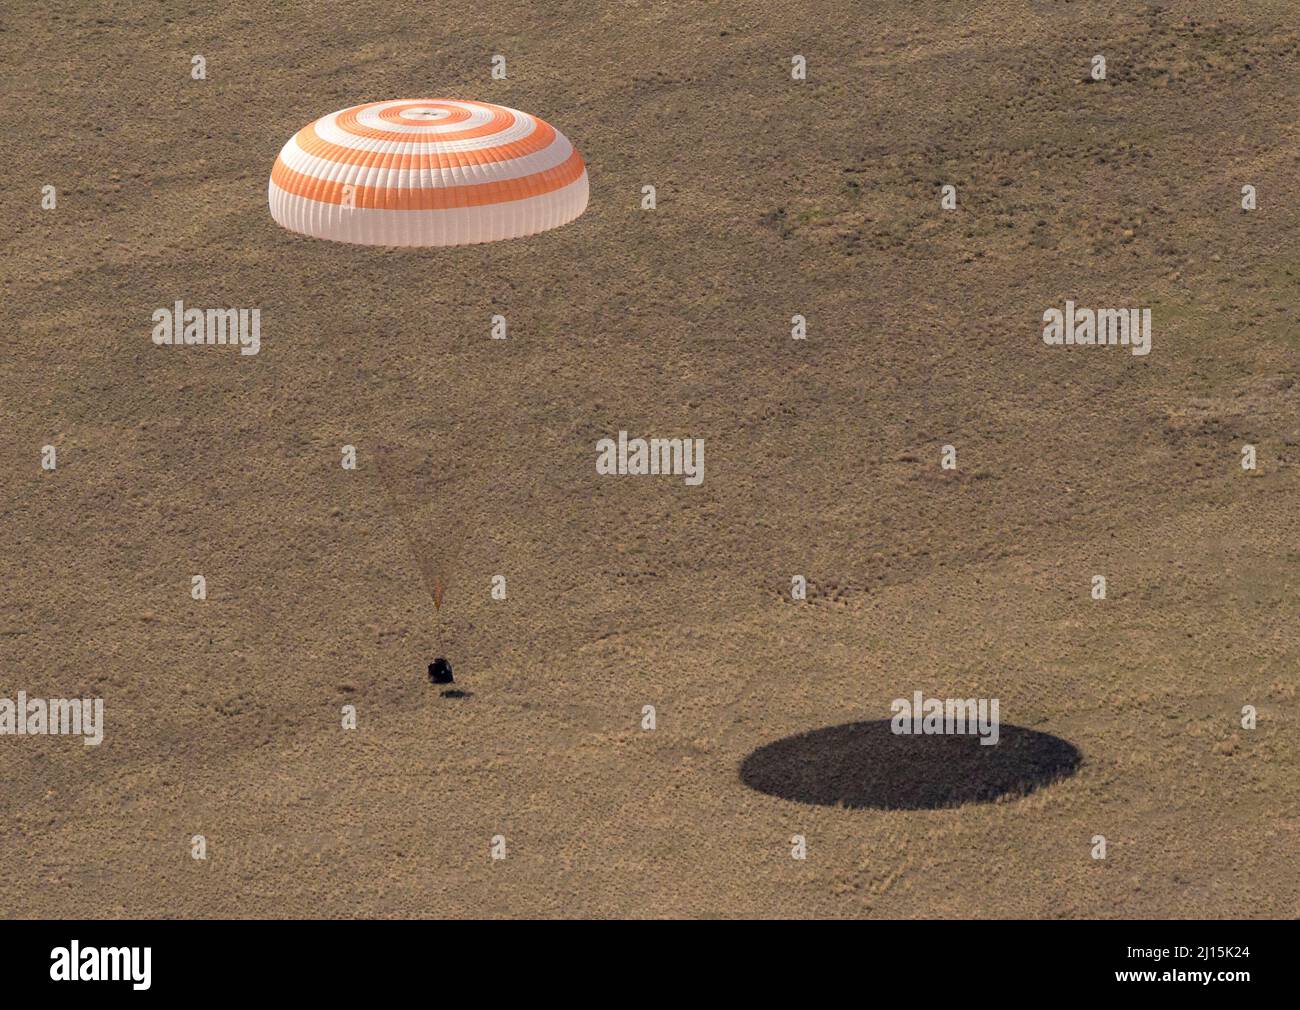 The Soyuz MS-17 spacecraft is seen as it lands in a remote area near the town of Zhezkazgan, Kazakhstan with Expedition 64 crew members Kate Rubins of NASA, Sergey Ryzhikov and Sergey Kud-Sverchkov of Roscosmos, Saturday, April 17, 2021. Rubins, Ryzhikov and Kud-Sverchkov returned after 185 days in space having served as Expedition 63-64 crew members onboard the International Space Station. Photo Credit: NASA/Bill Ingalls Stock Photo